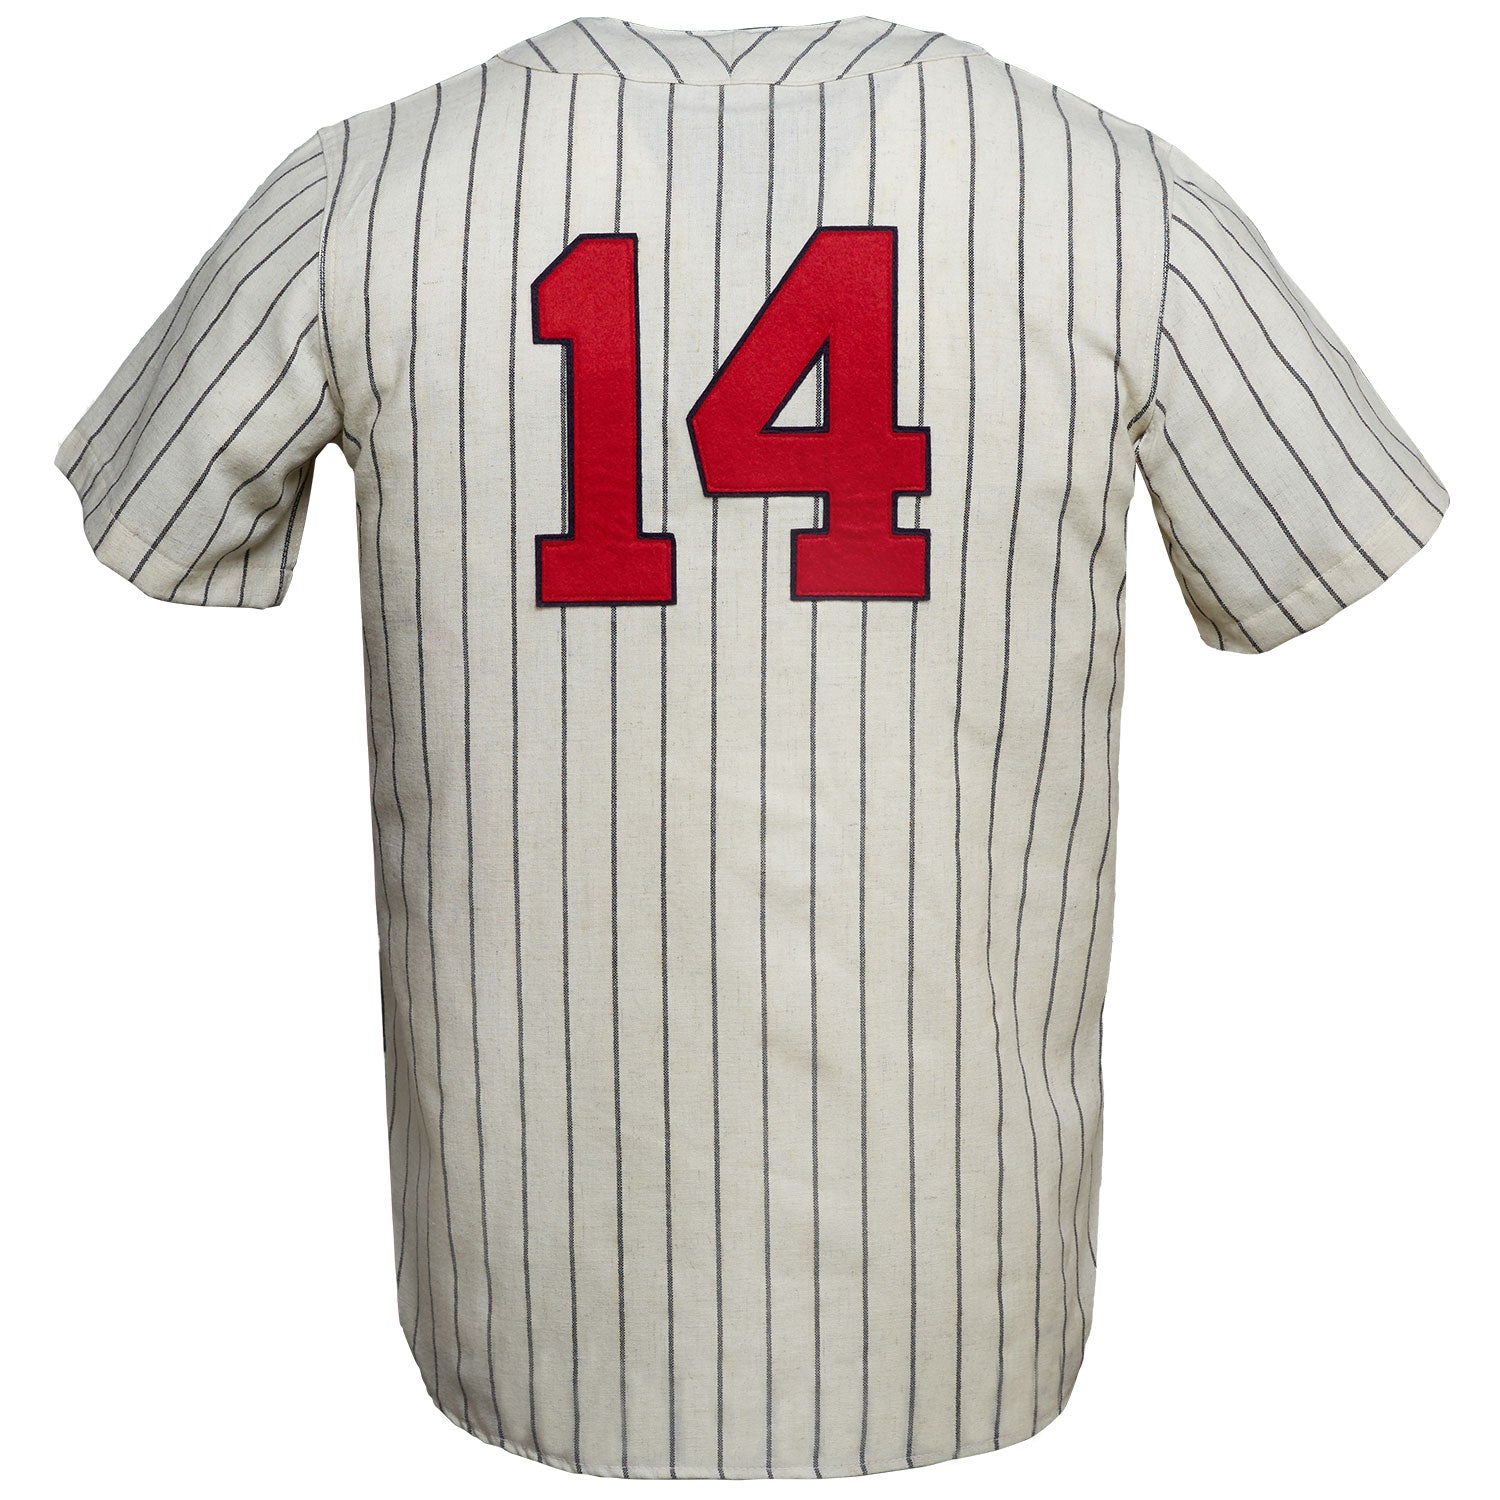 University of Mississippi 1969 Home Jersey